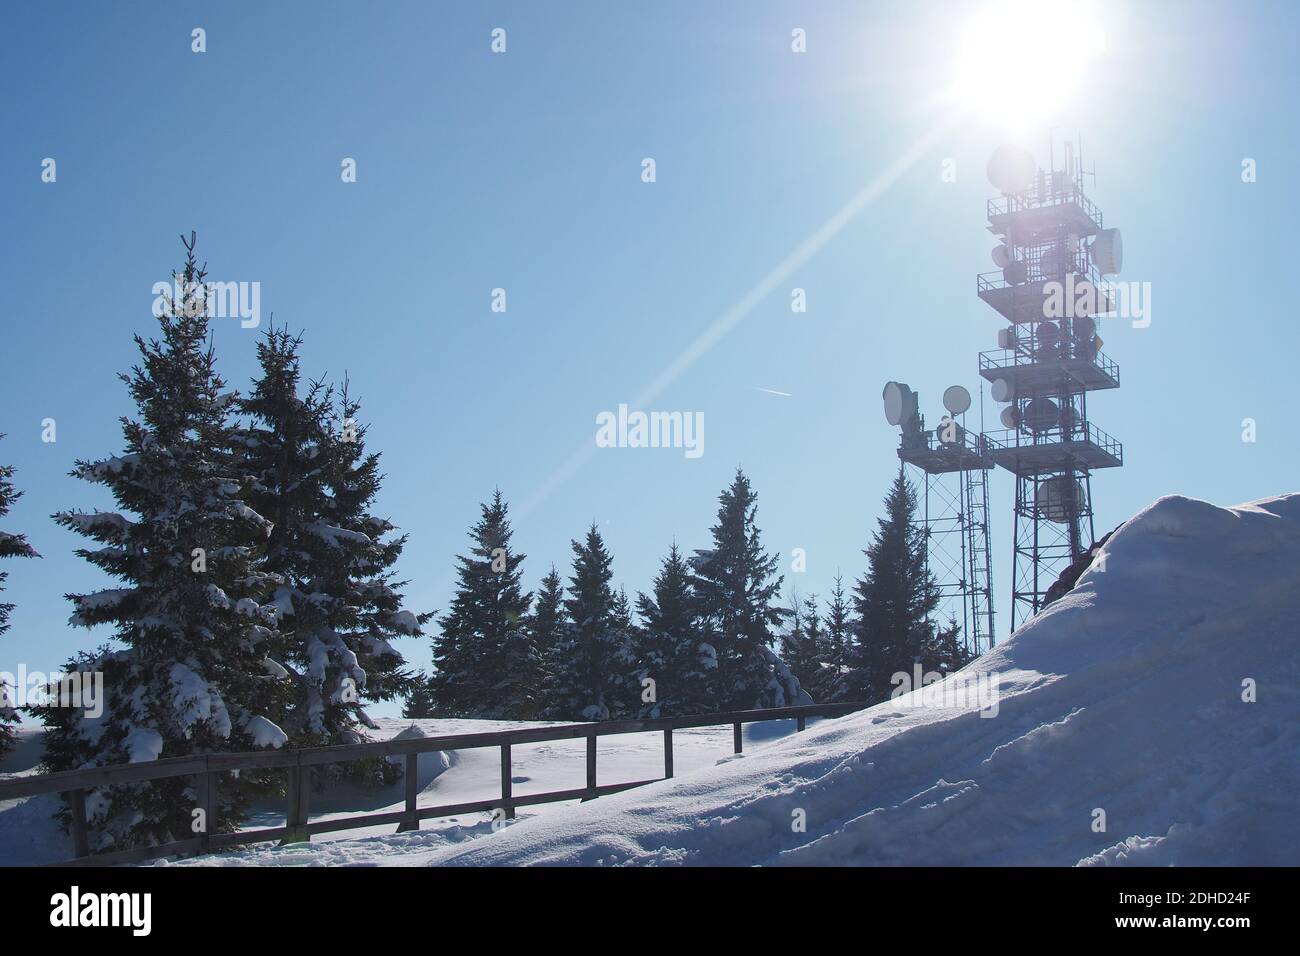 Communication tower with microwave relay dishes on the mountain Schoeckl in Austria in the Winter. The trees and the ground is covered in snow. Stock Photo